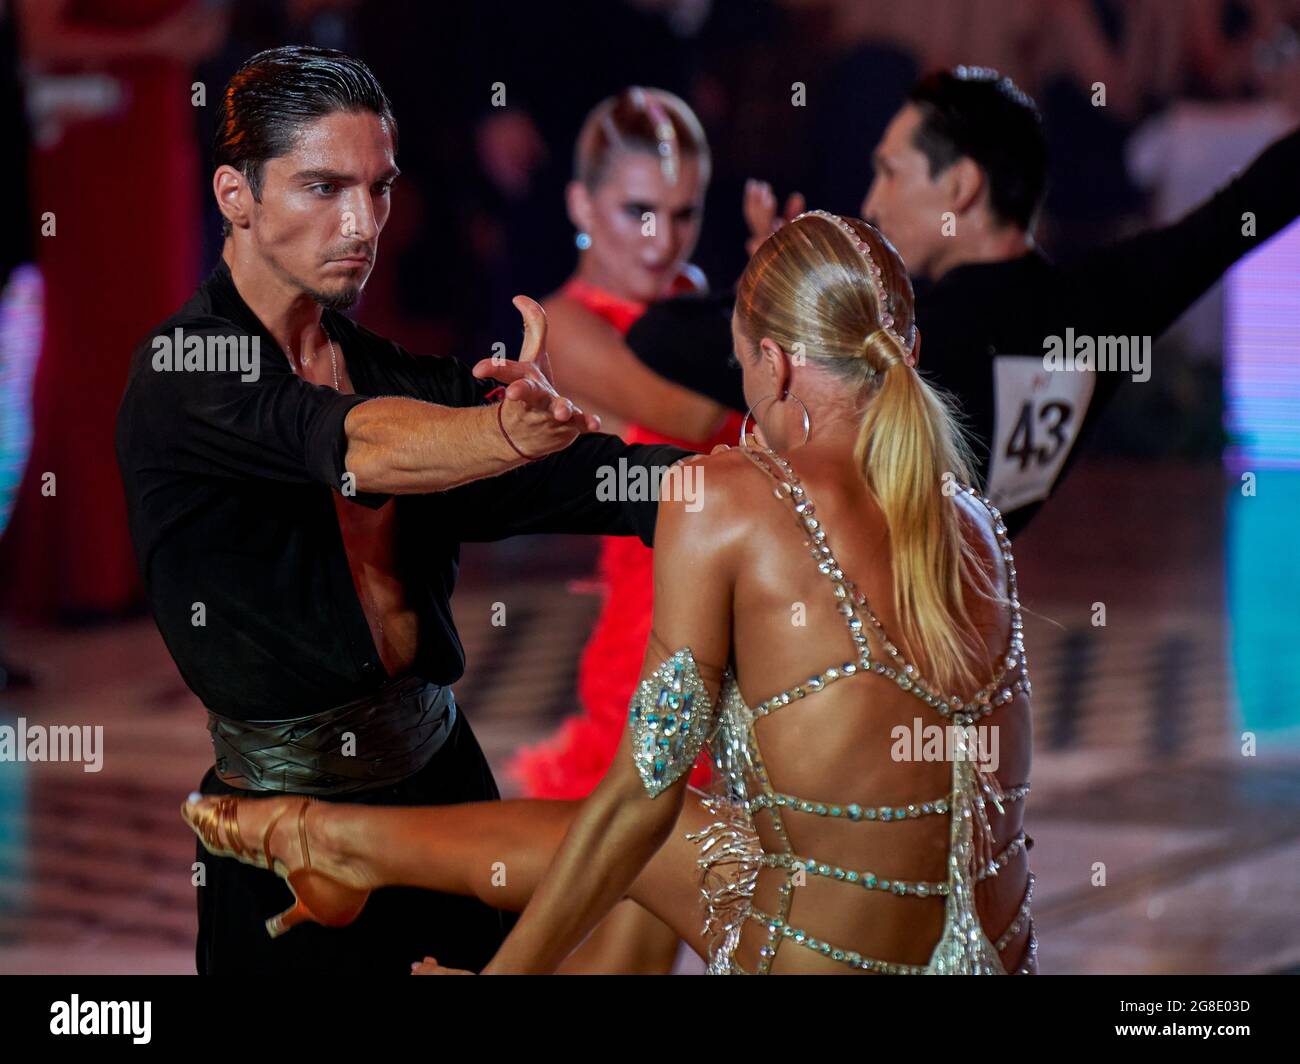 Moscow, Russia. 17th July, 2021. An incredible paso doble performance during the 2021 Latin America Dance World Cup among professionals and amateurs in Moscow. Credit: SOPA Images Limited/Alamy Live News Stock Photo